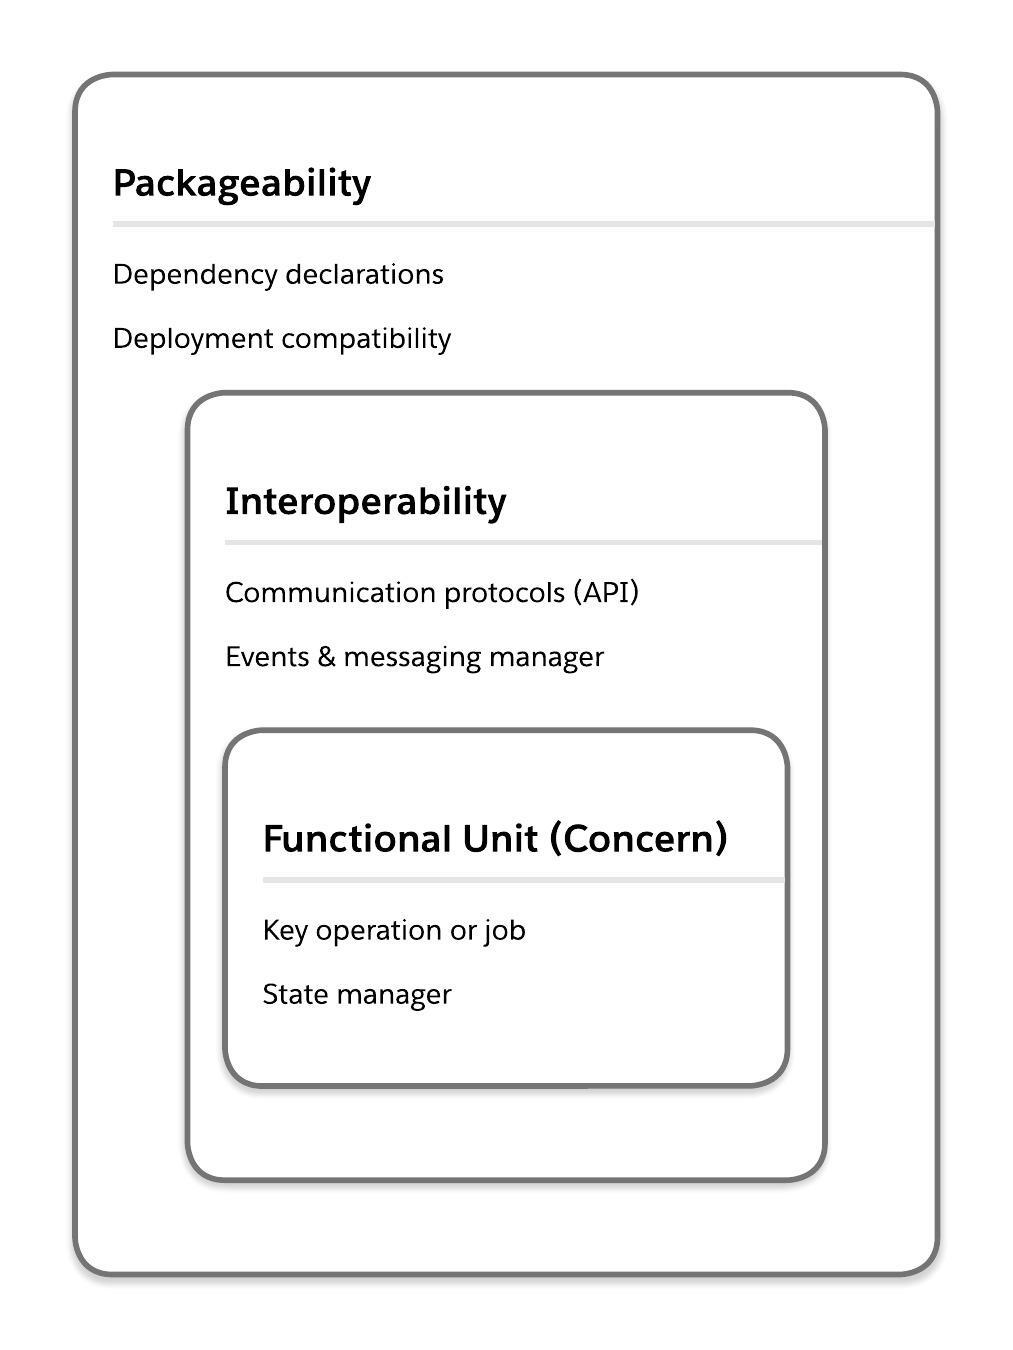 This is a diagram showing how the topics in composable relate through three nested cards. The innermost card is a functional unit, the next layer is interoperability, and the outer layer is packagability.